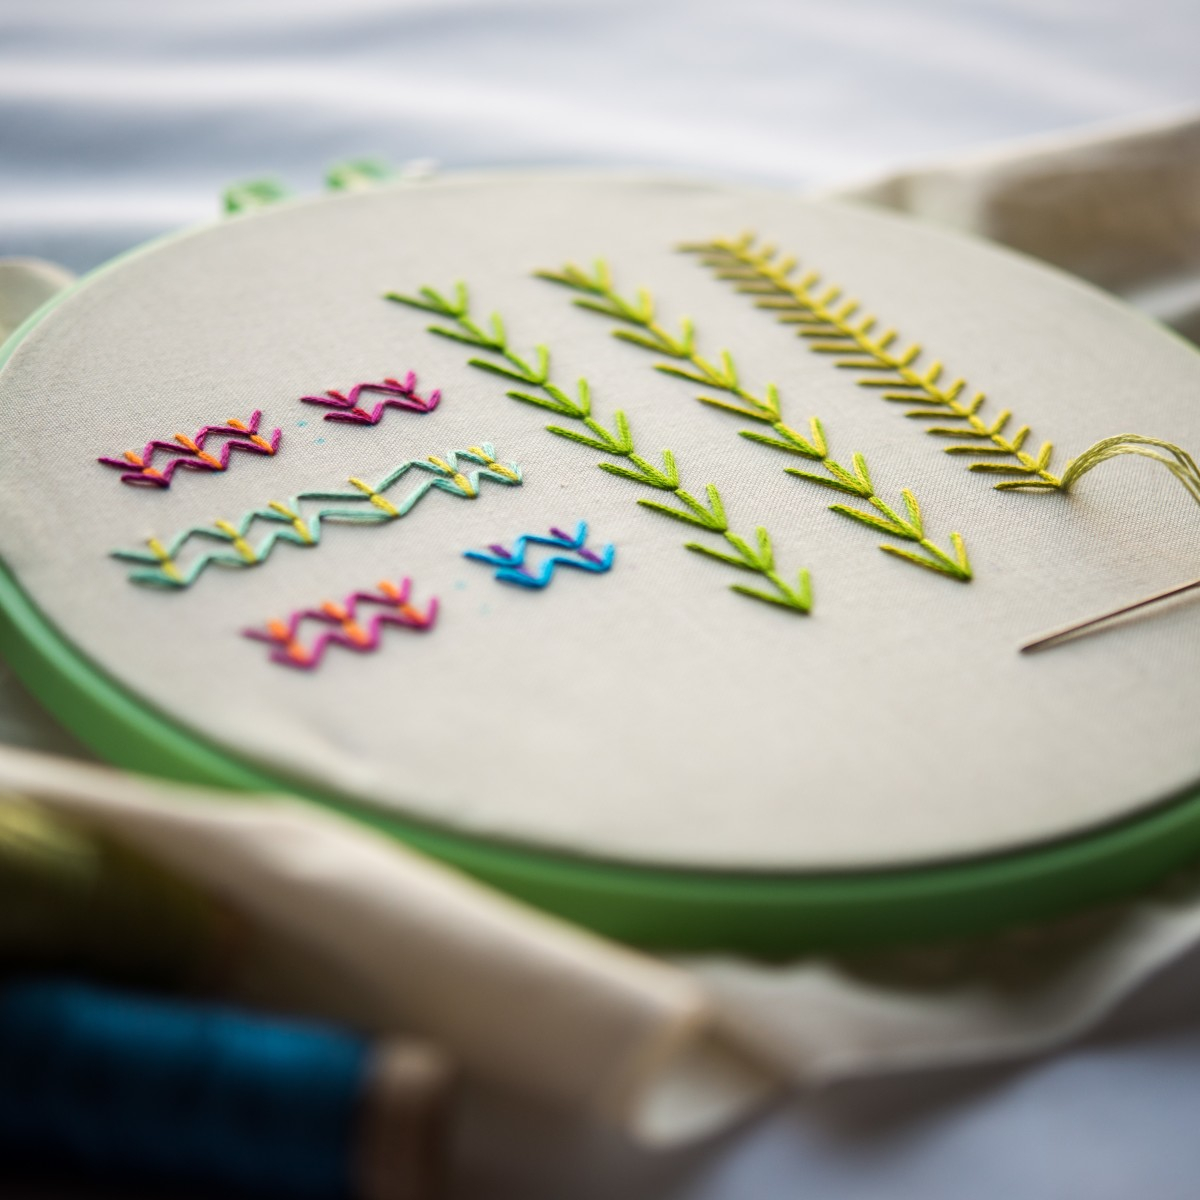 Fun Embroidery Patterns The Top 10 Hand Embroidery Stitches Every Beginner Should Learn